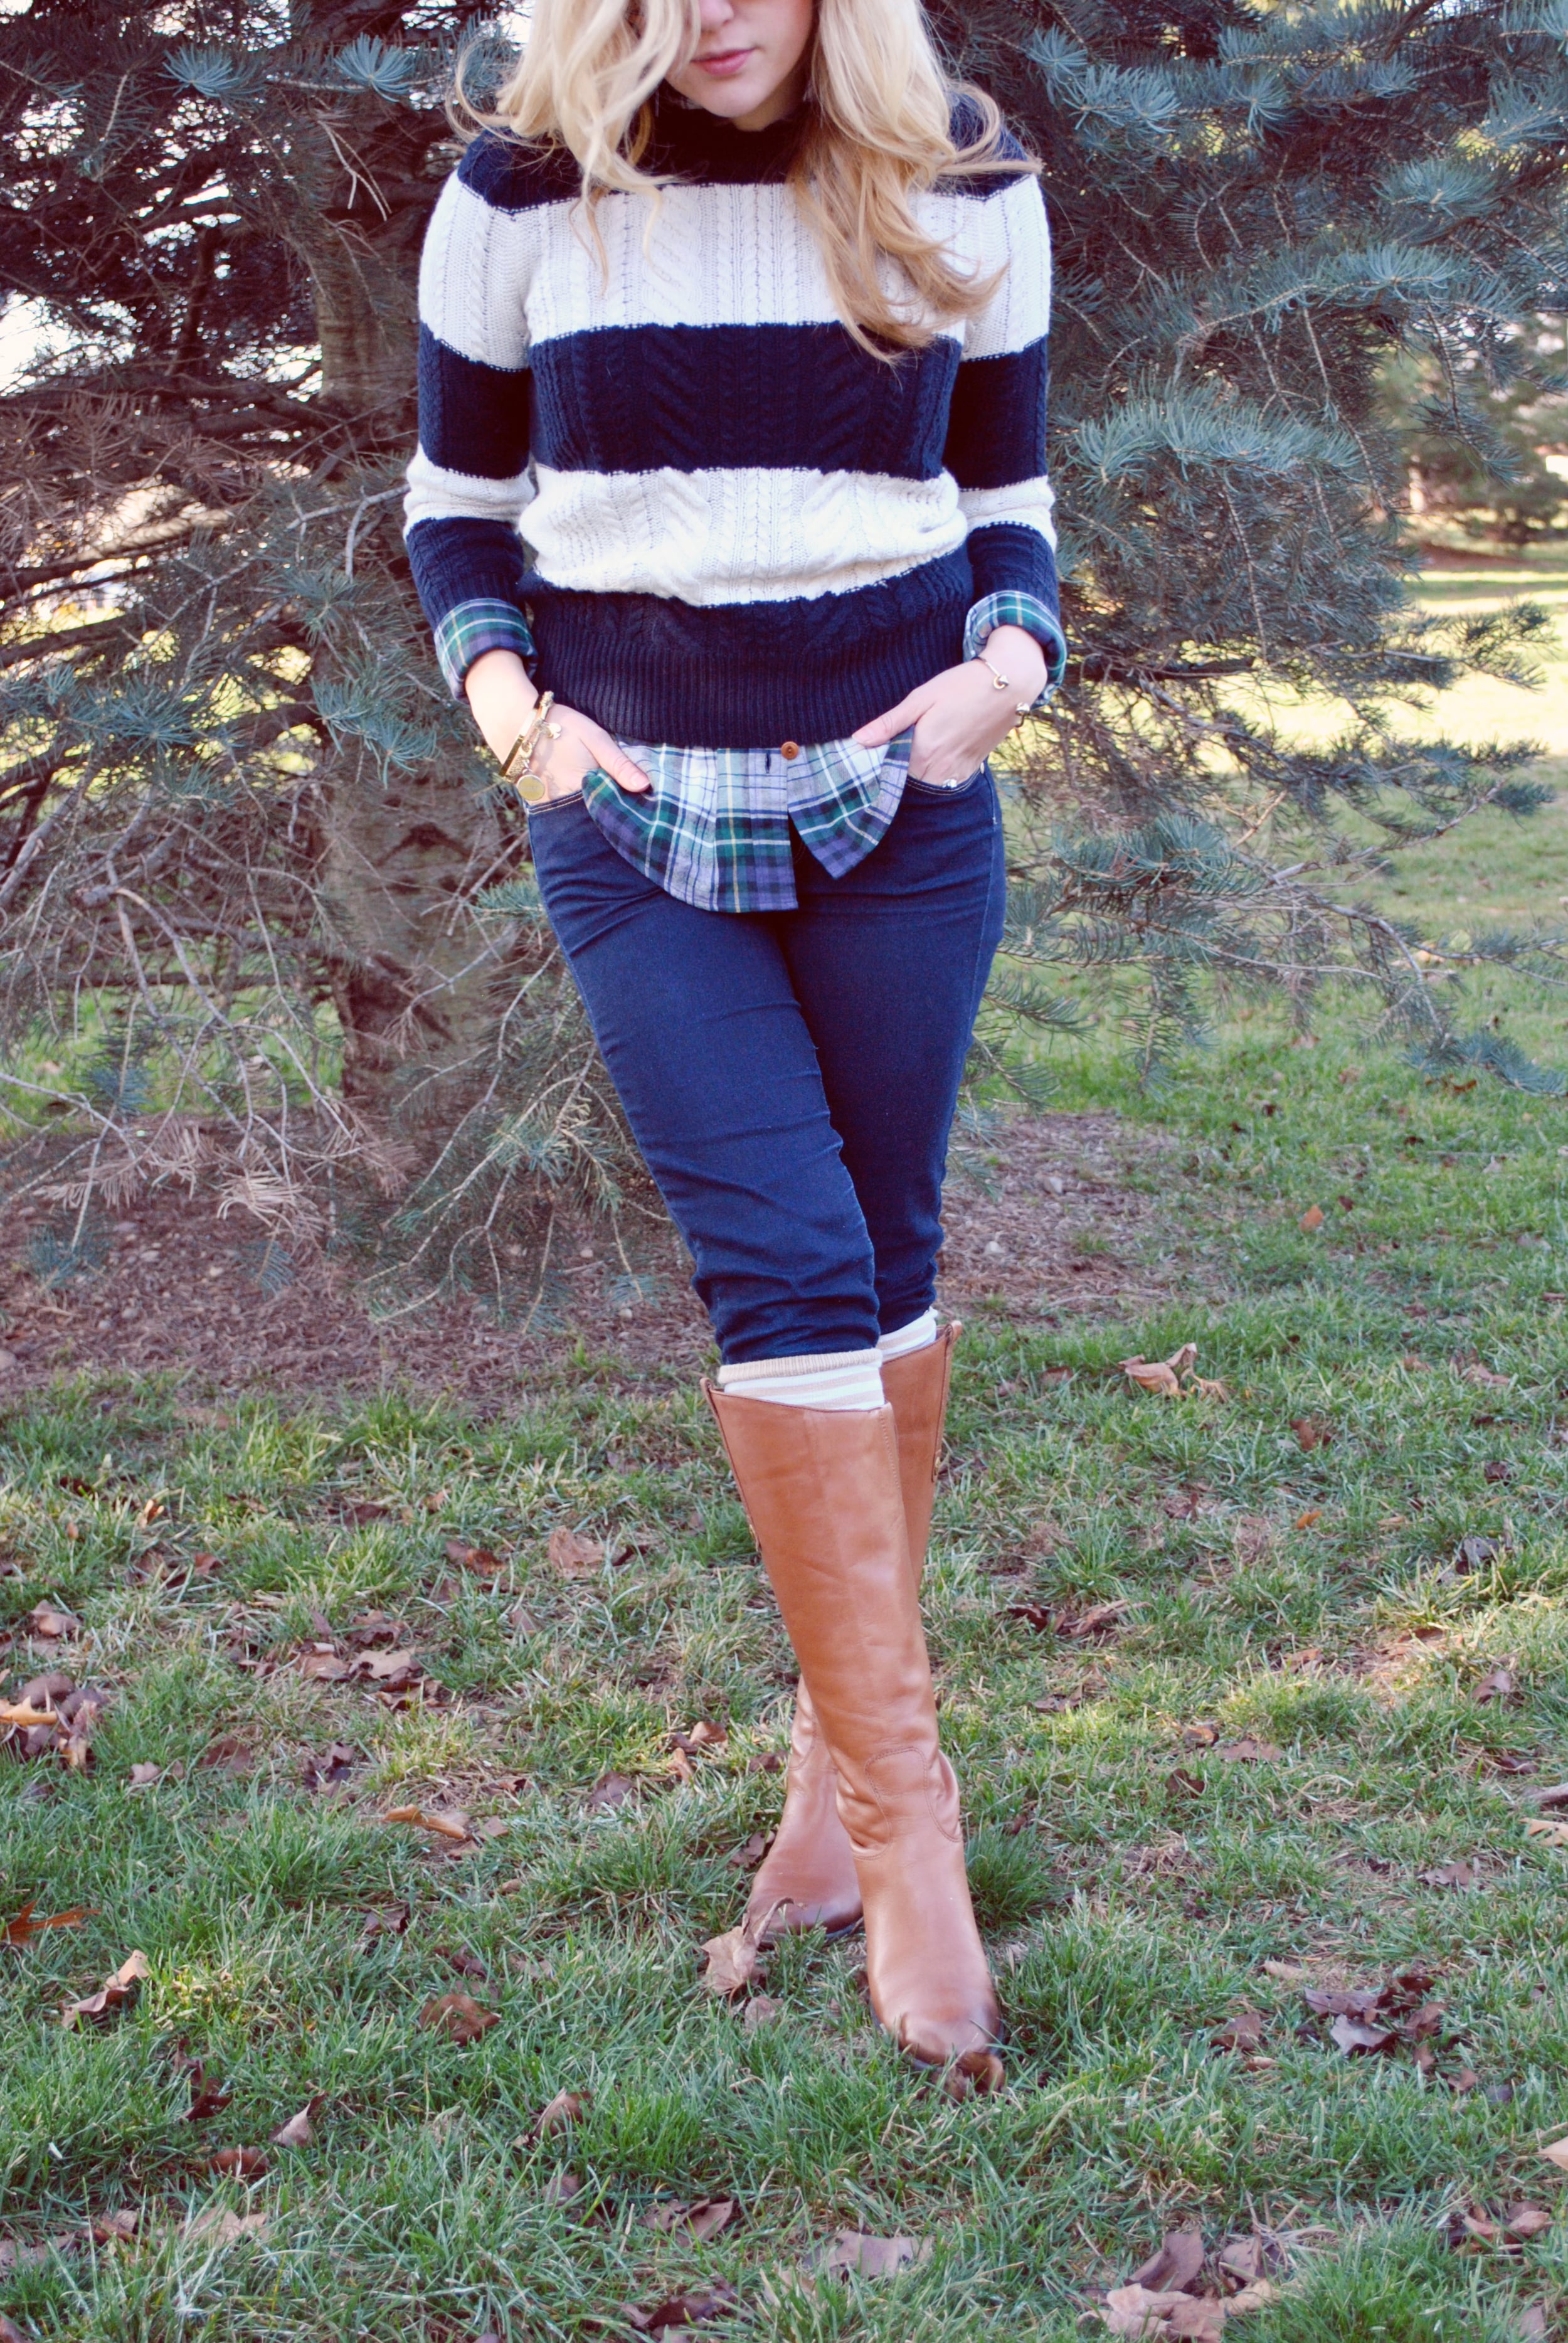 thoughtfulwish | boston fashion // new england fashion // j.crew // cashmere sweater // stripe sweater // stripes and plaid // winter outfit // spring outfit // meredith wish